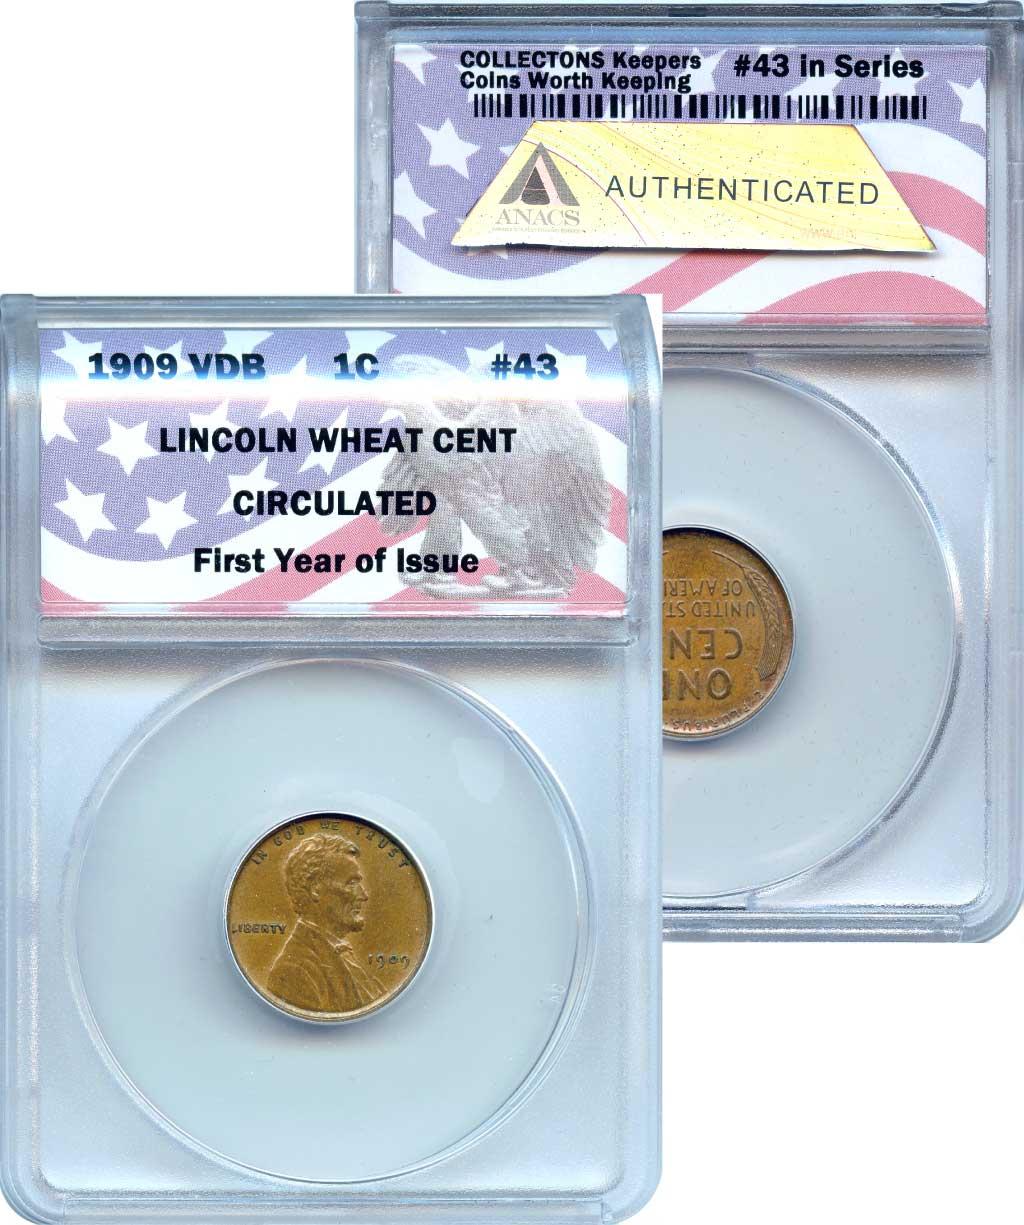 CollecTons Keepers #43: 1909 VDB Lincoln Wheat Cent Certified in Exclusive ANACS Circulated Holder